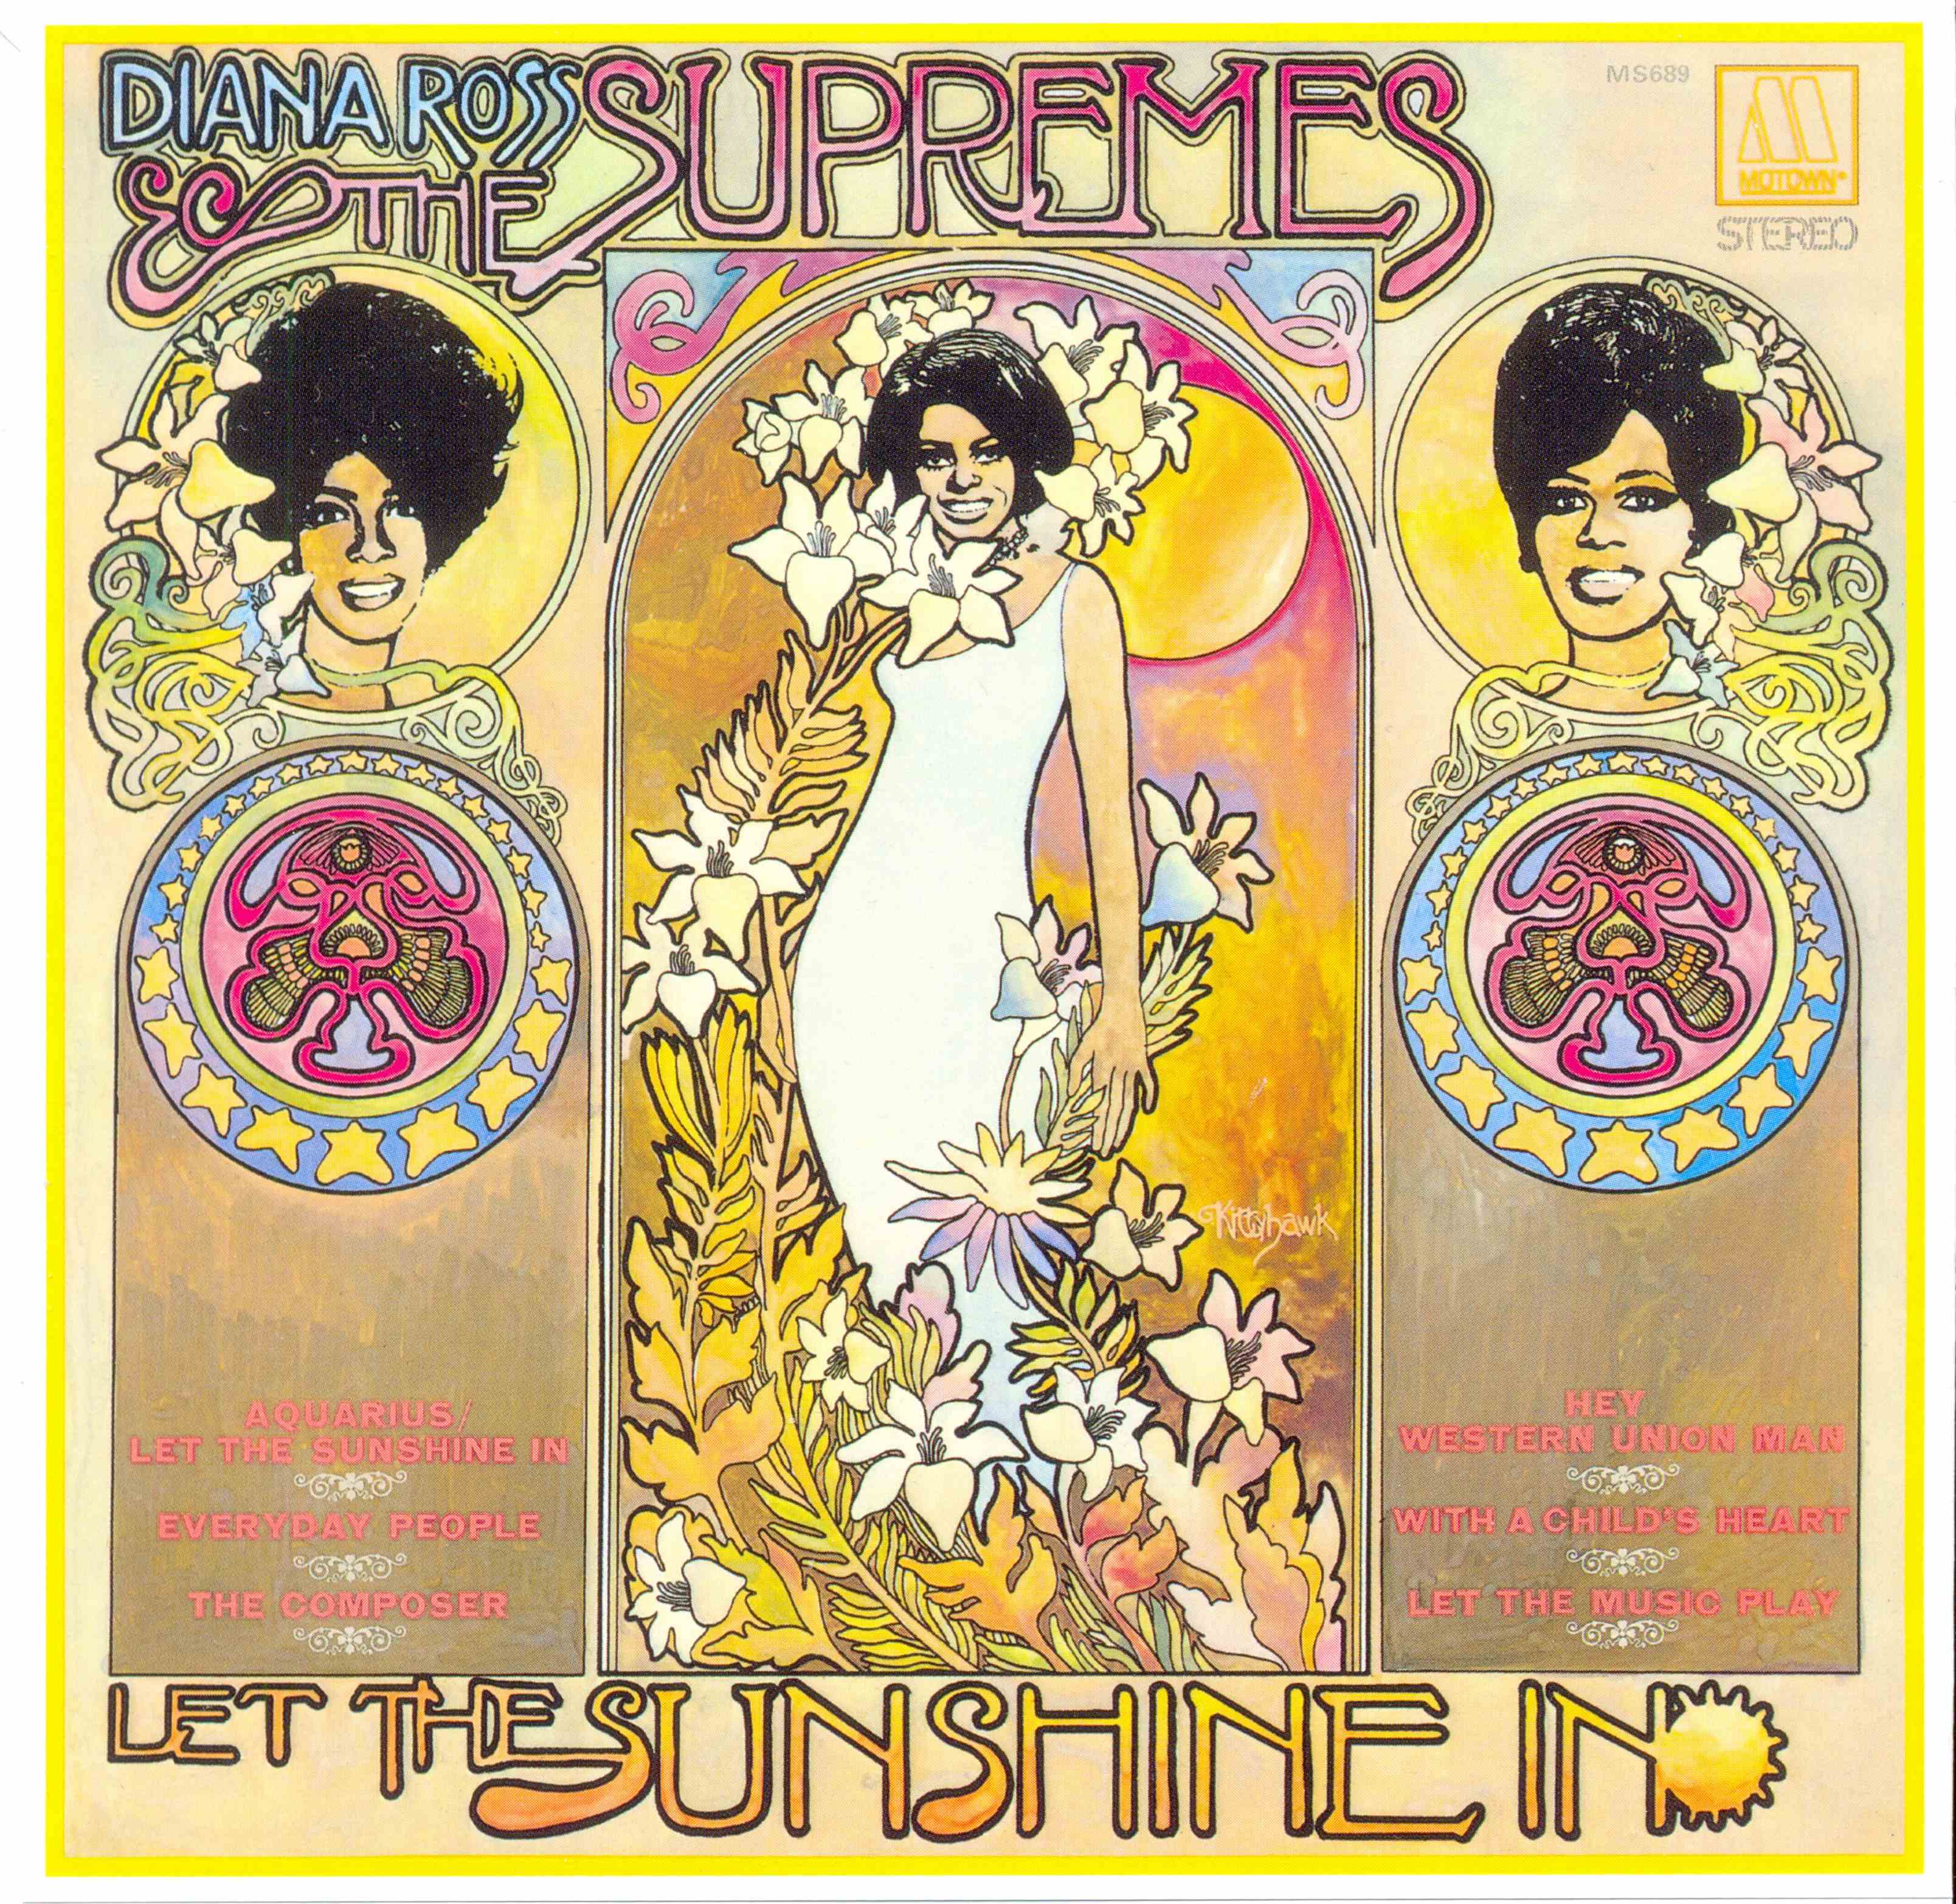 1969 - Diana Ross & The Supremes - Let The Sunshine In